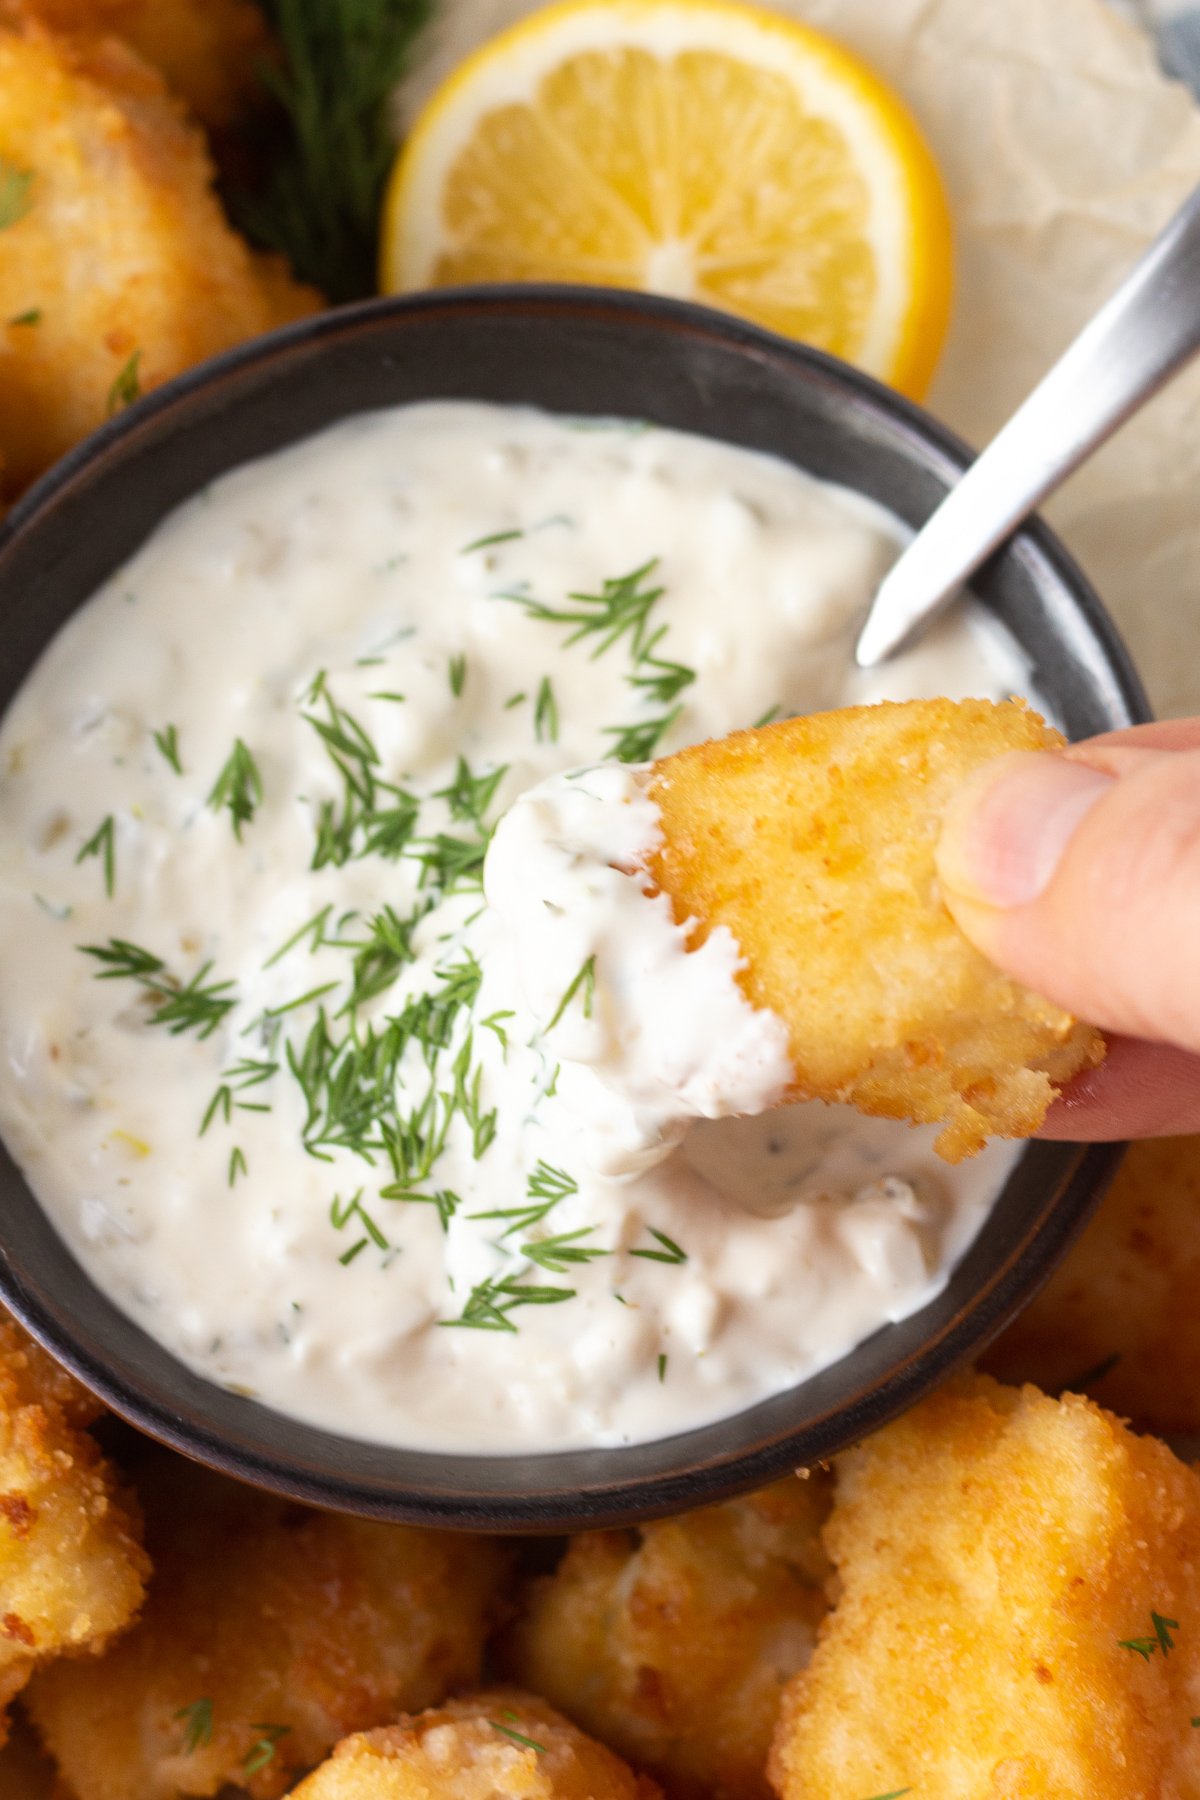 Small bowl of tartar sauce with dill on top and a piece of fried walleye being dipped into it.